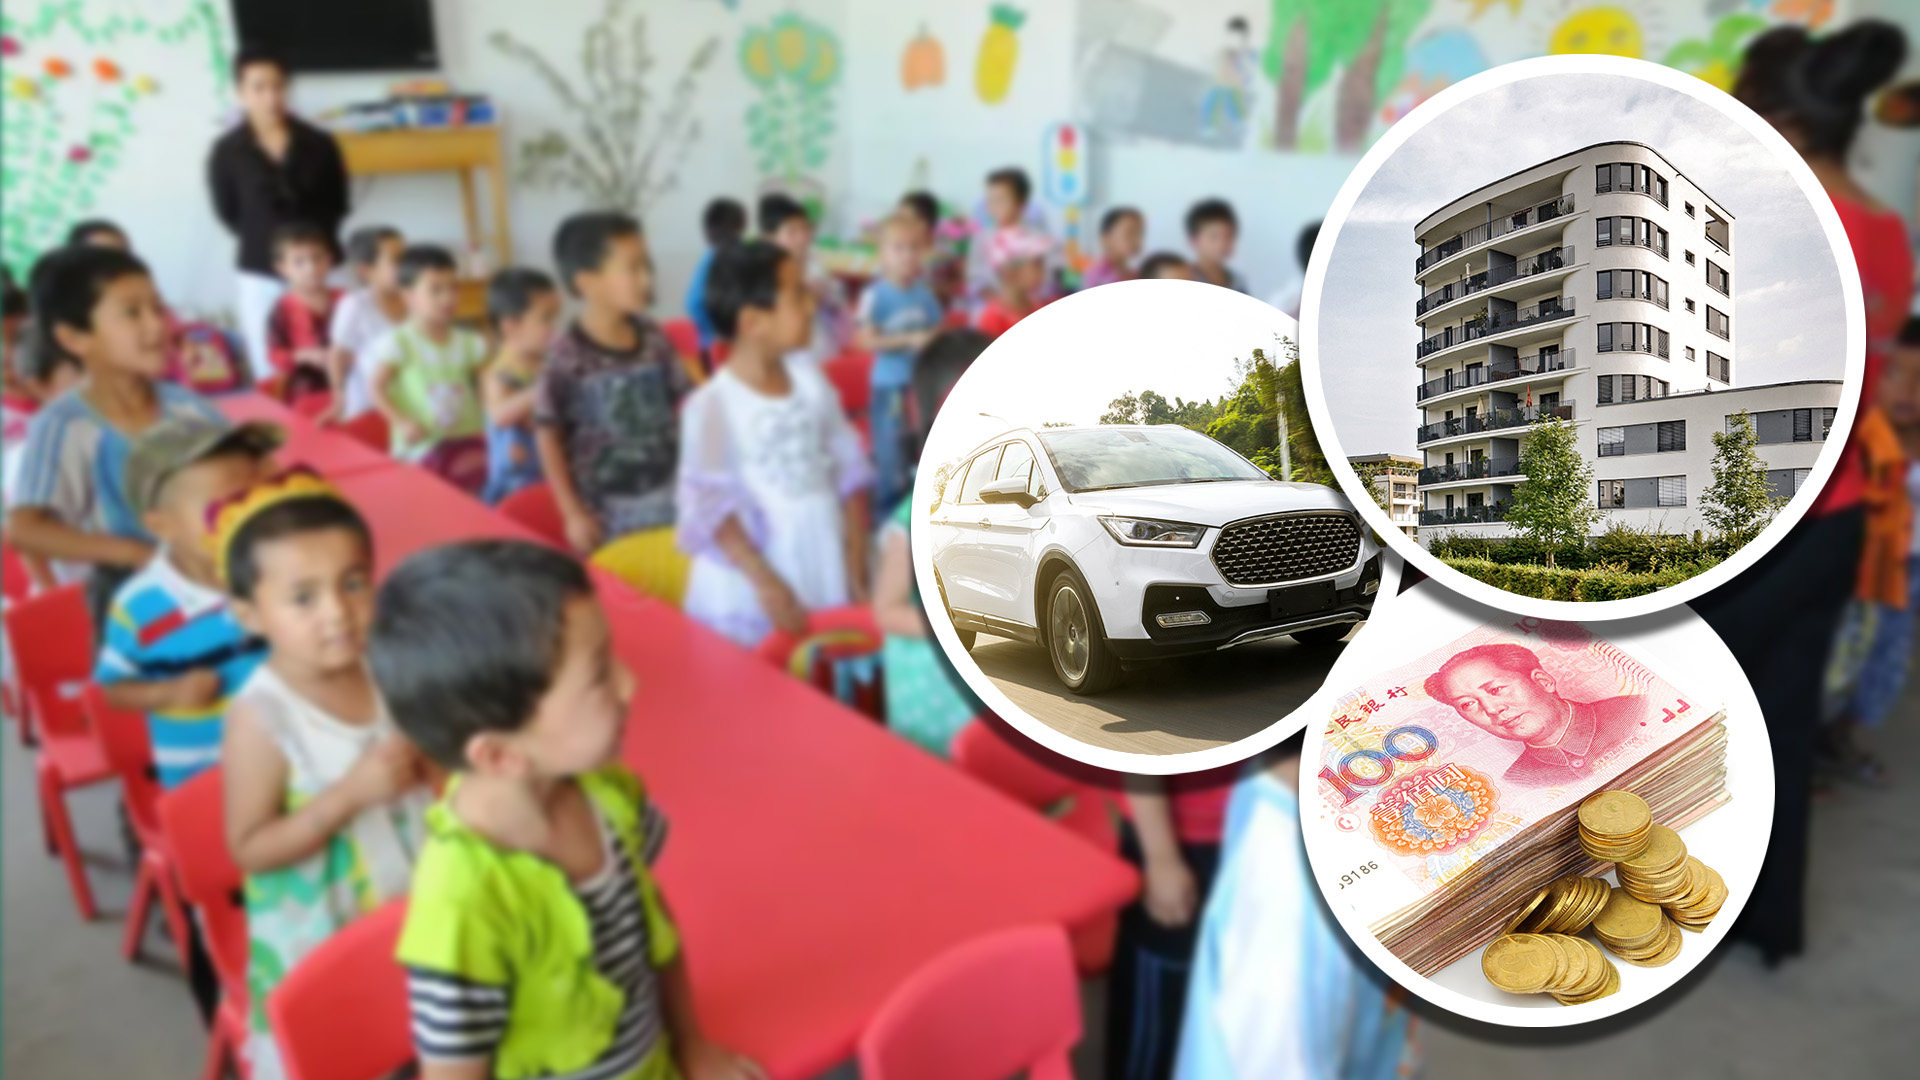 A wave of online anger against the promotion of materialistic values has been provoked by a viral video showing kindergarten children in China asking each other about flats, cars and money. Photo: SCMP composite/Weibo